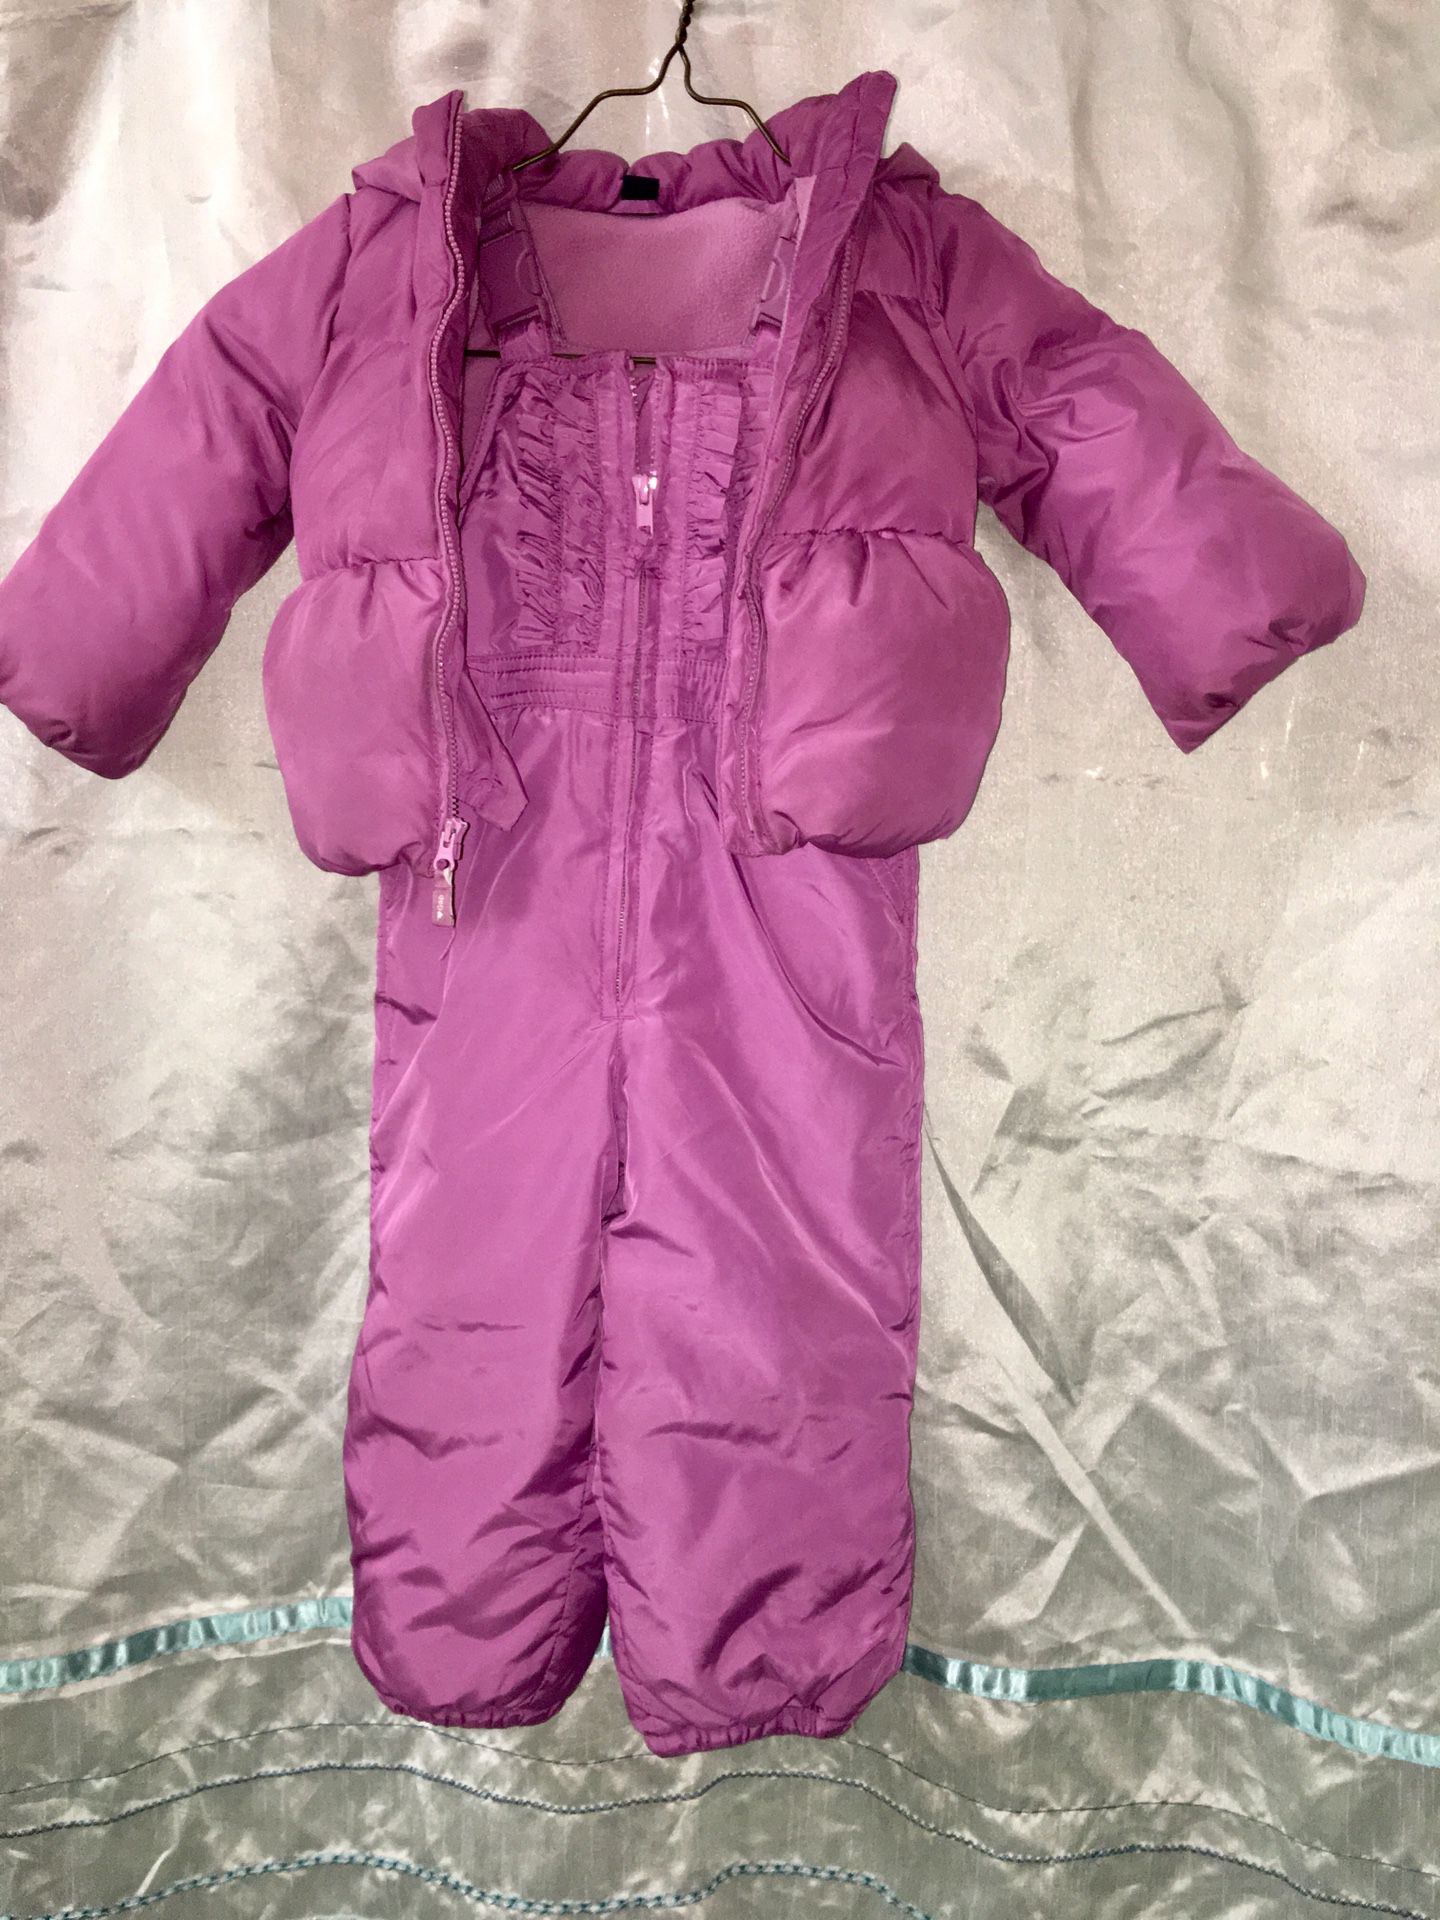 $15 Baby Gap Snow Suit, Toddler Size 2